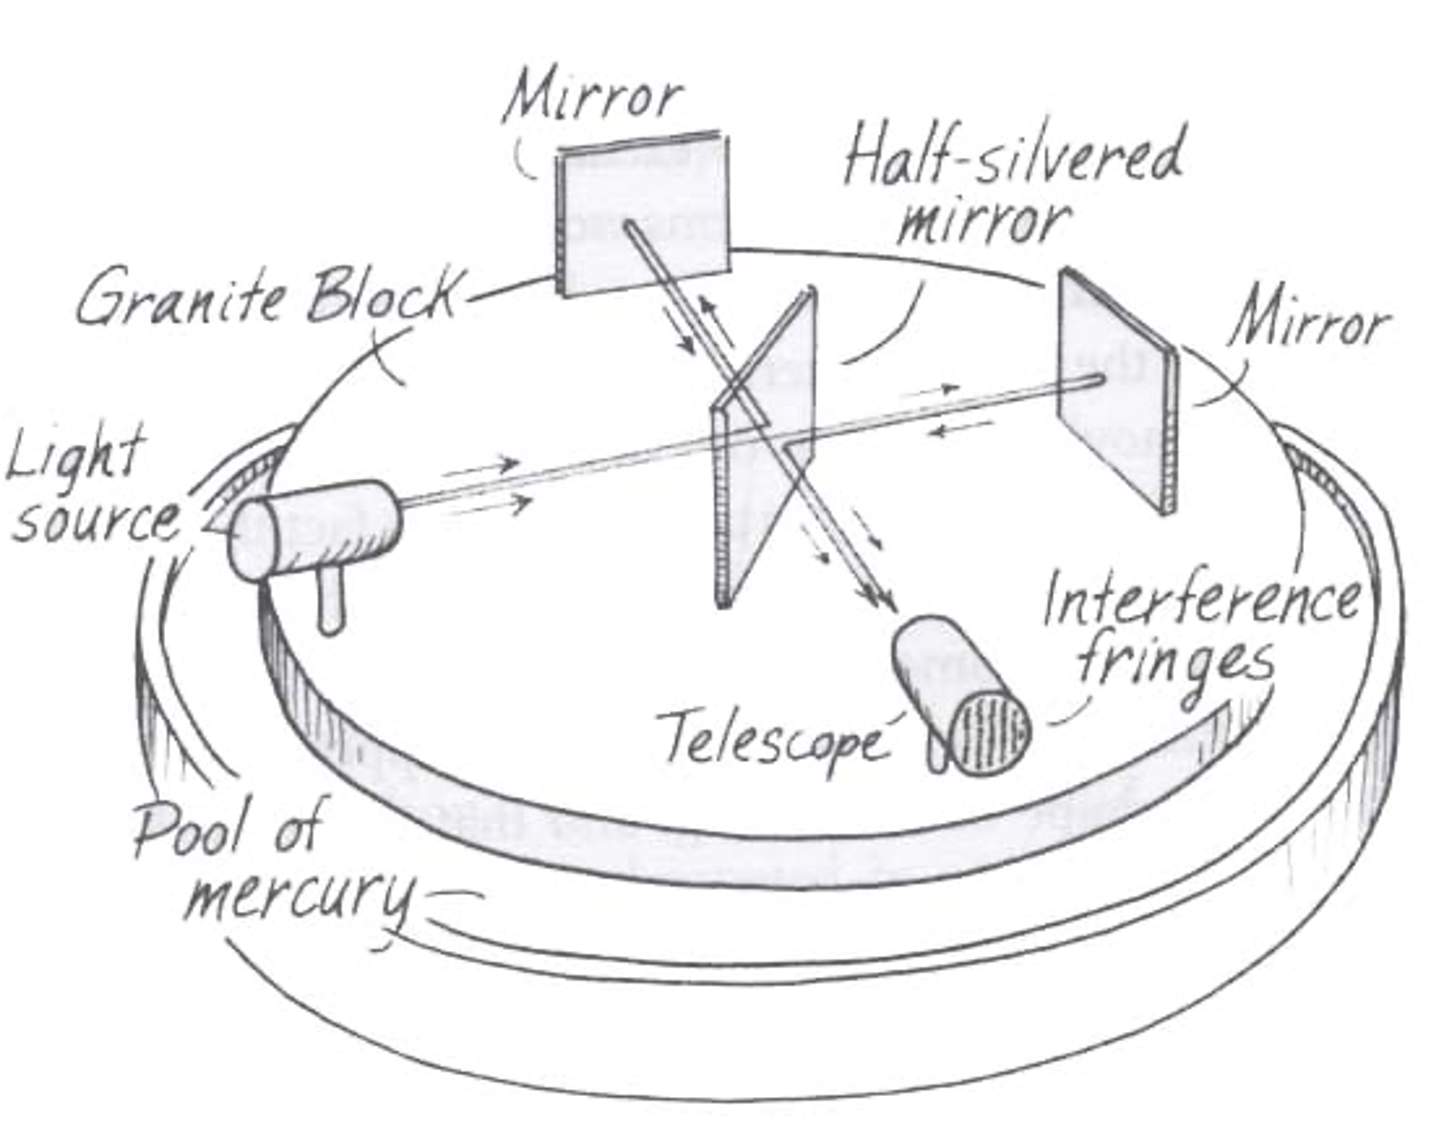 Michelson-Morley experiment set-up